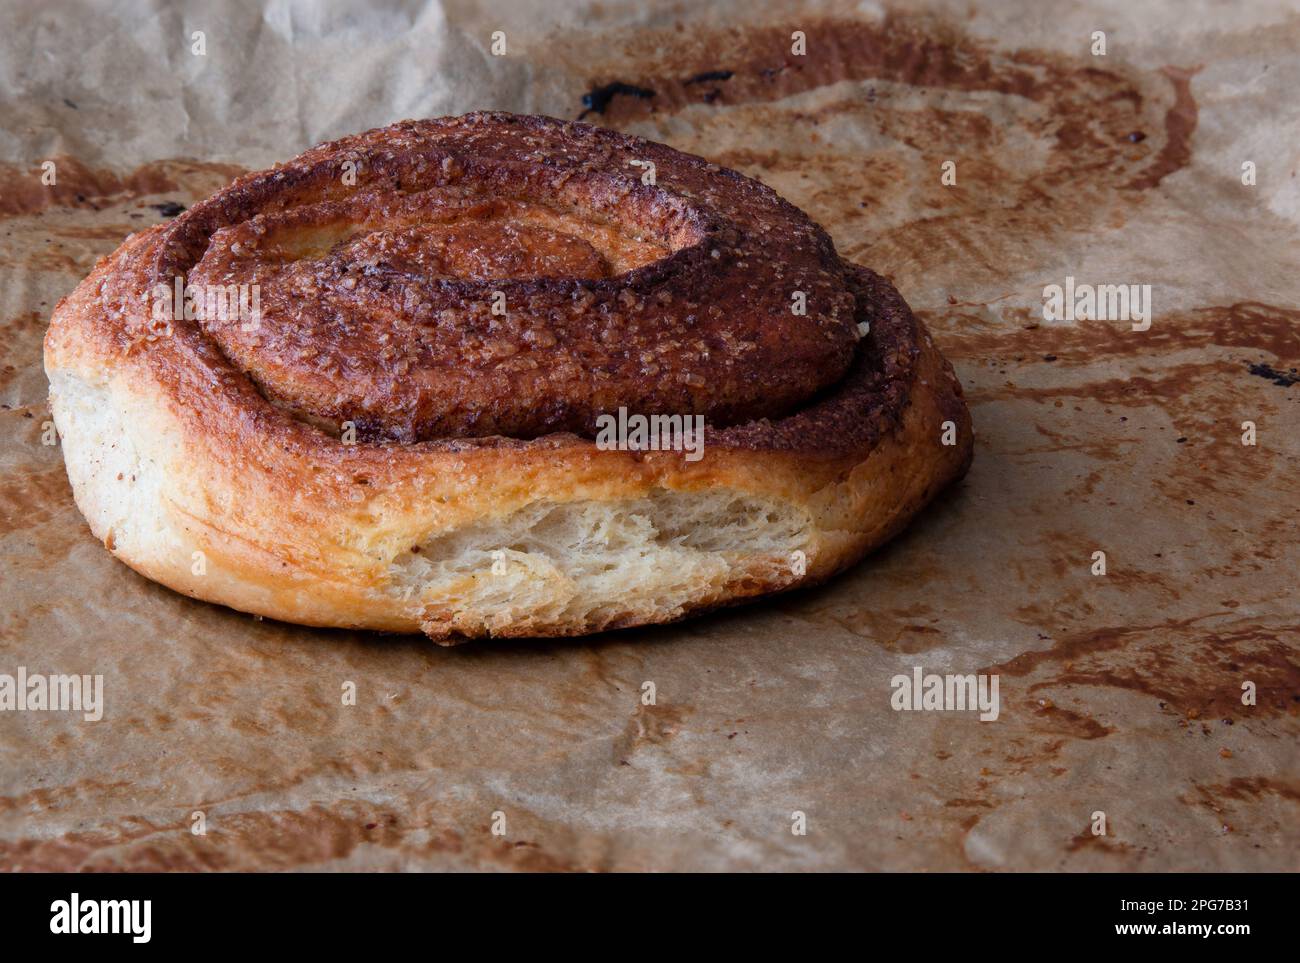 side view of homemade cinnamon bun on sheet of baking paper. Stock Photo